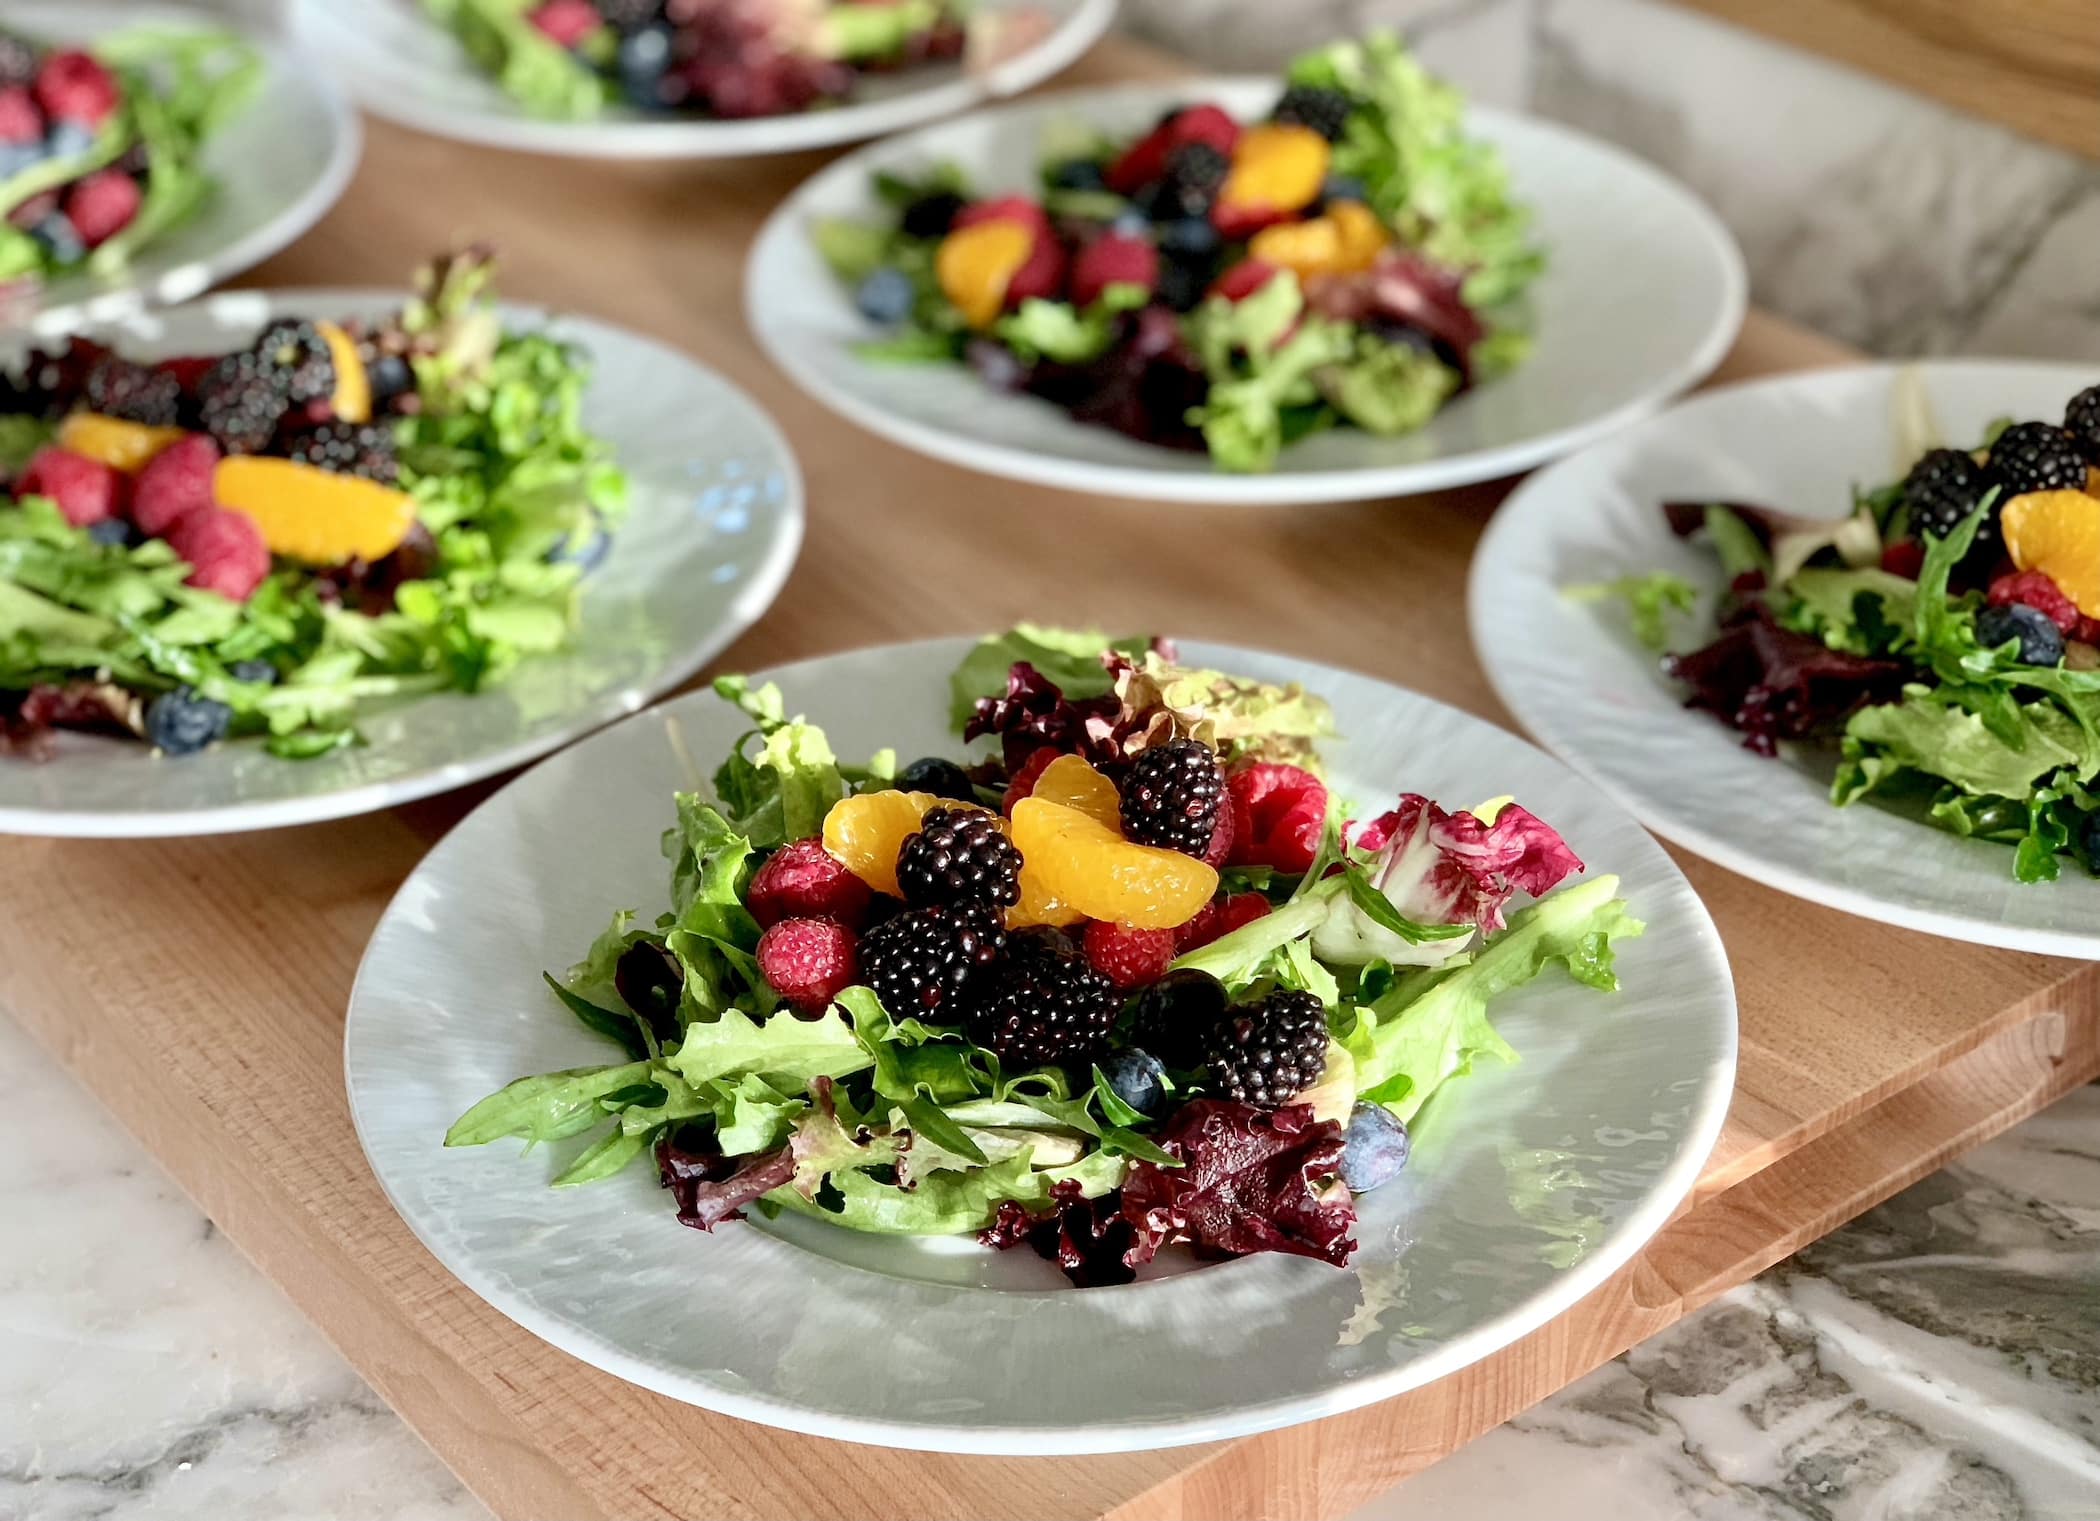 Mesclun salad greens tossed with red wine vinaigrette and topped with fresh fruit and berries.